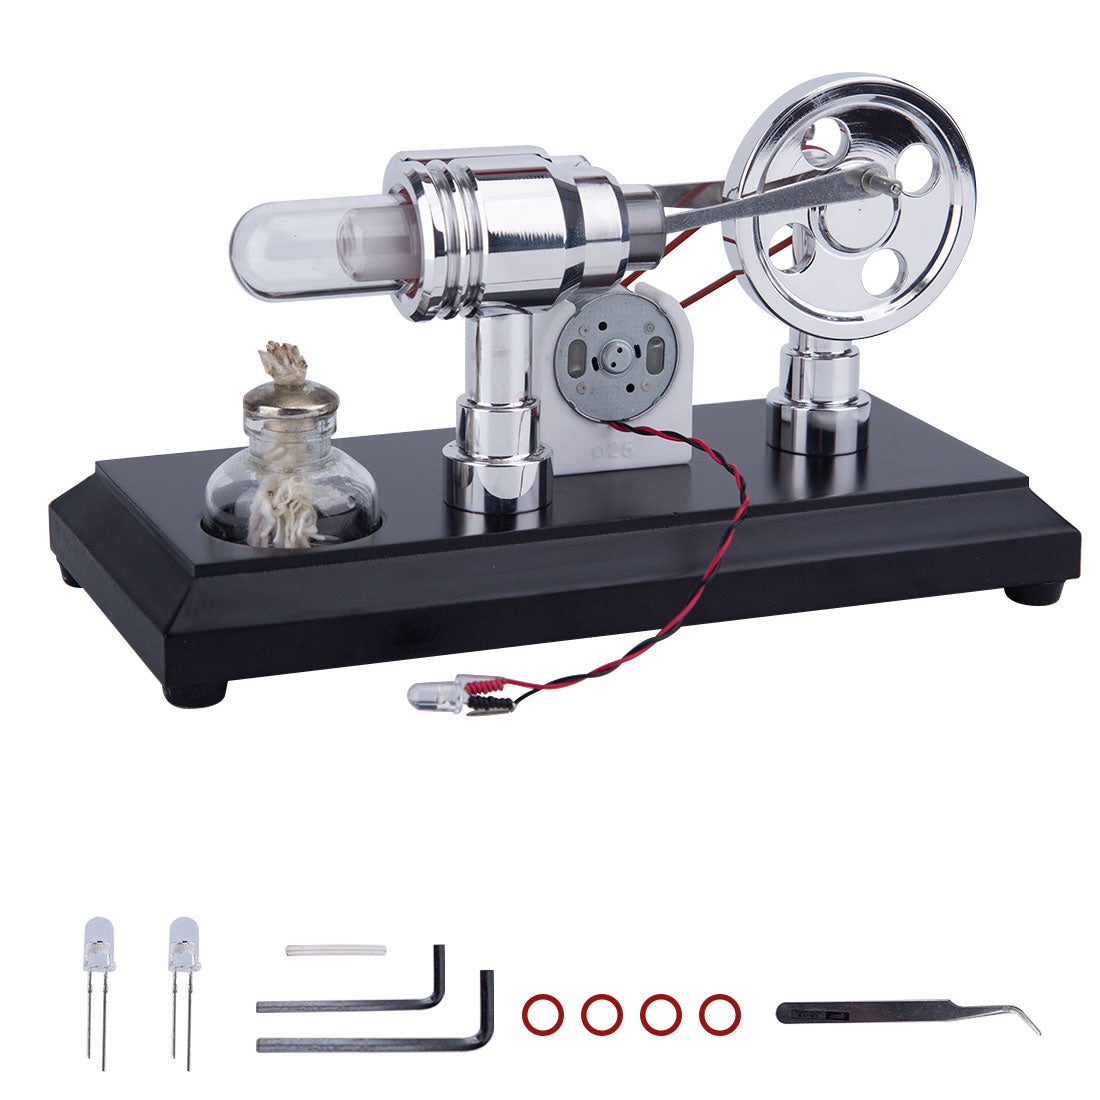 ENJOMOR Metal Gamma Hot-air Stirling Engine Model with Lamp Beads Educational Toys Gifts